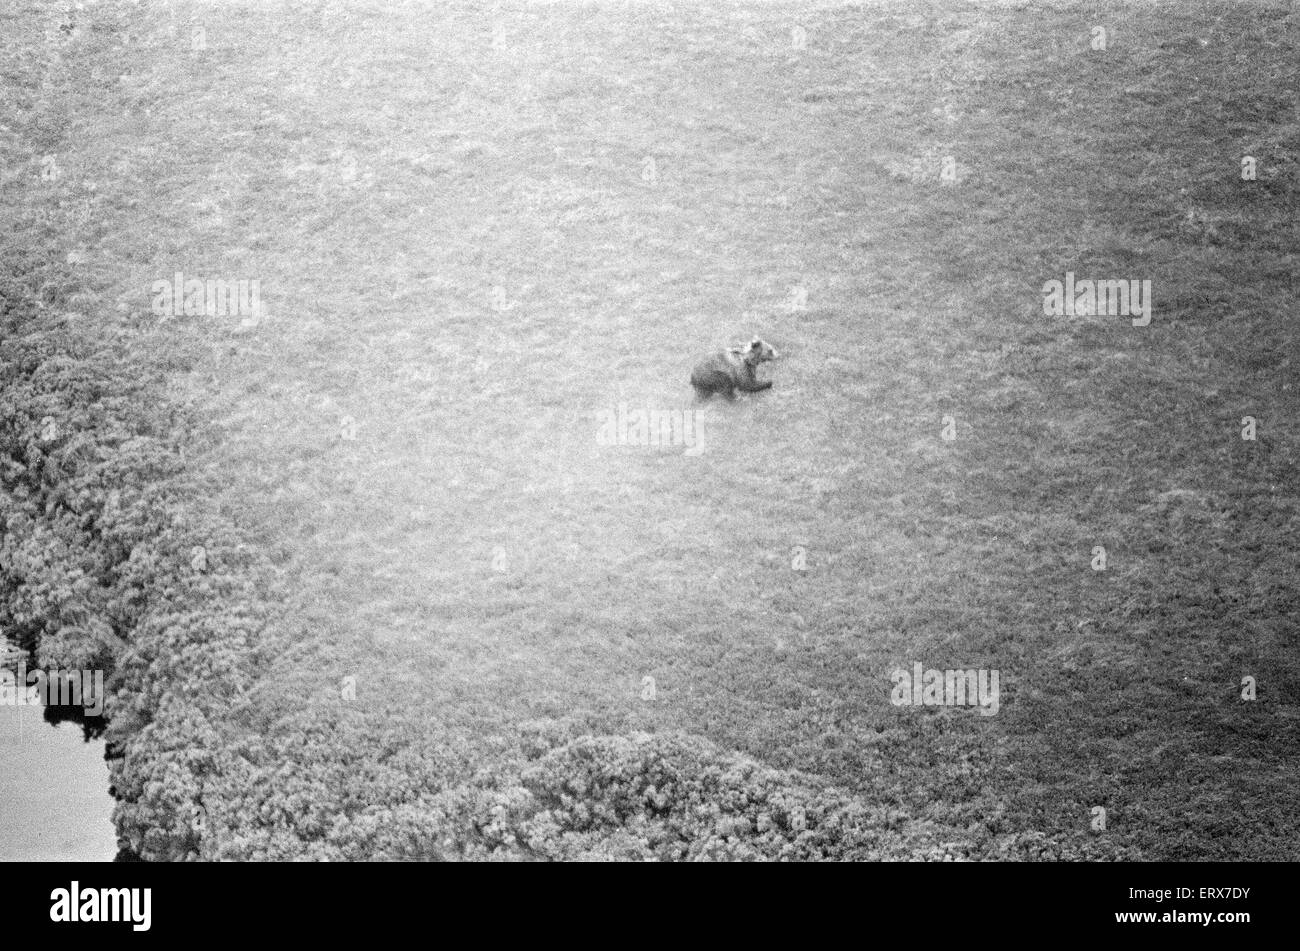 Hercules The Bear, tracked down and captured on the waste moorlands of North Uist, in the Outer Hebrides of Scotland. 14th September 1980. The Bear was chased down by helicopter. Hercules has been in the wild for 3 weeks. Stock Photo